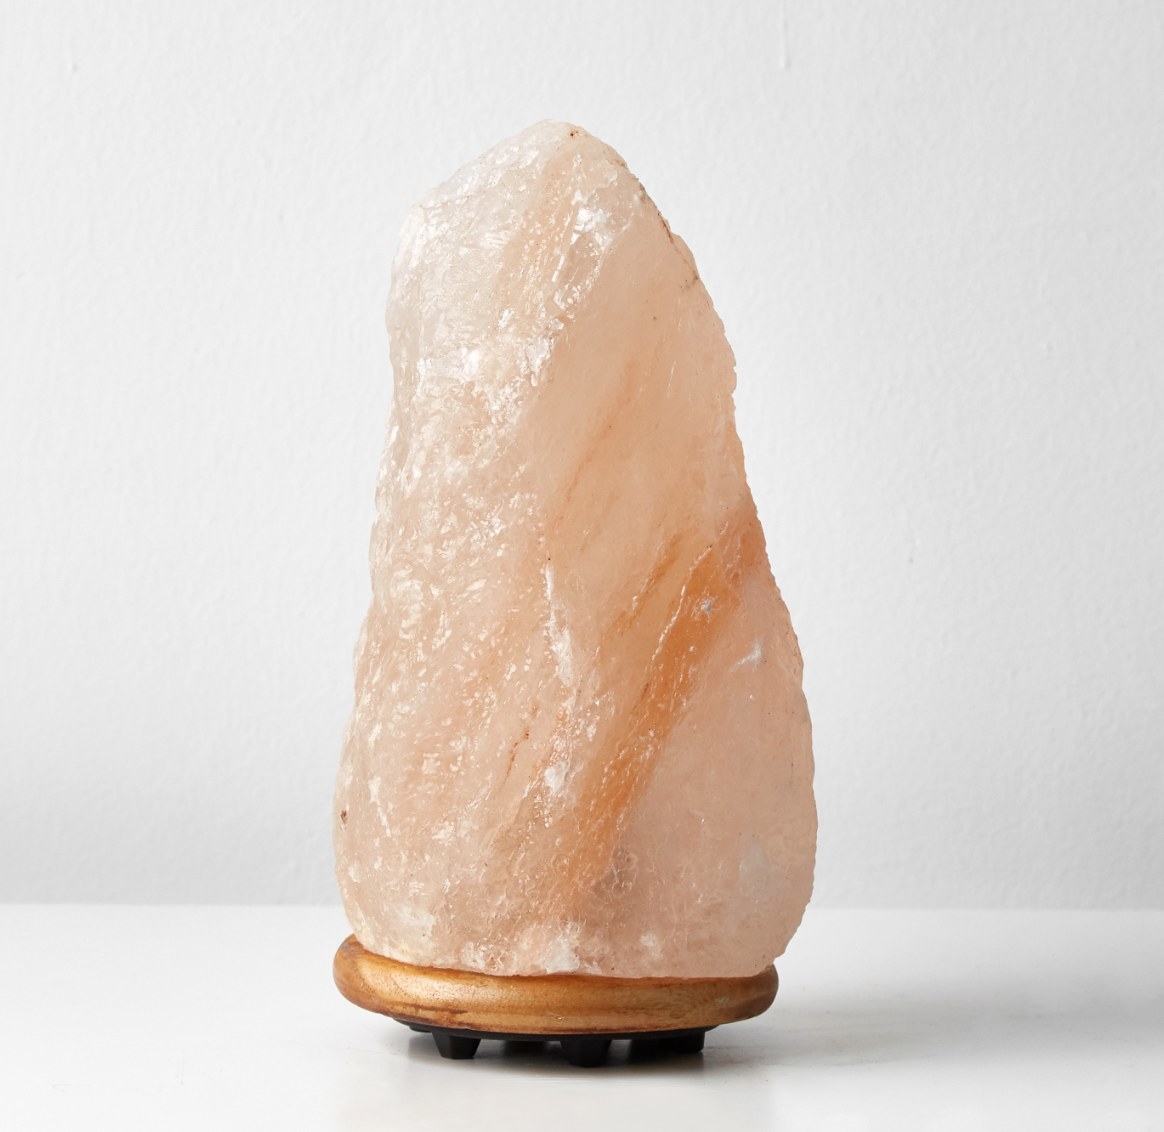 The Himalayan salt crystal lamp in blush pink with a wood stand